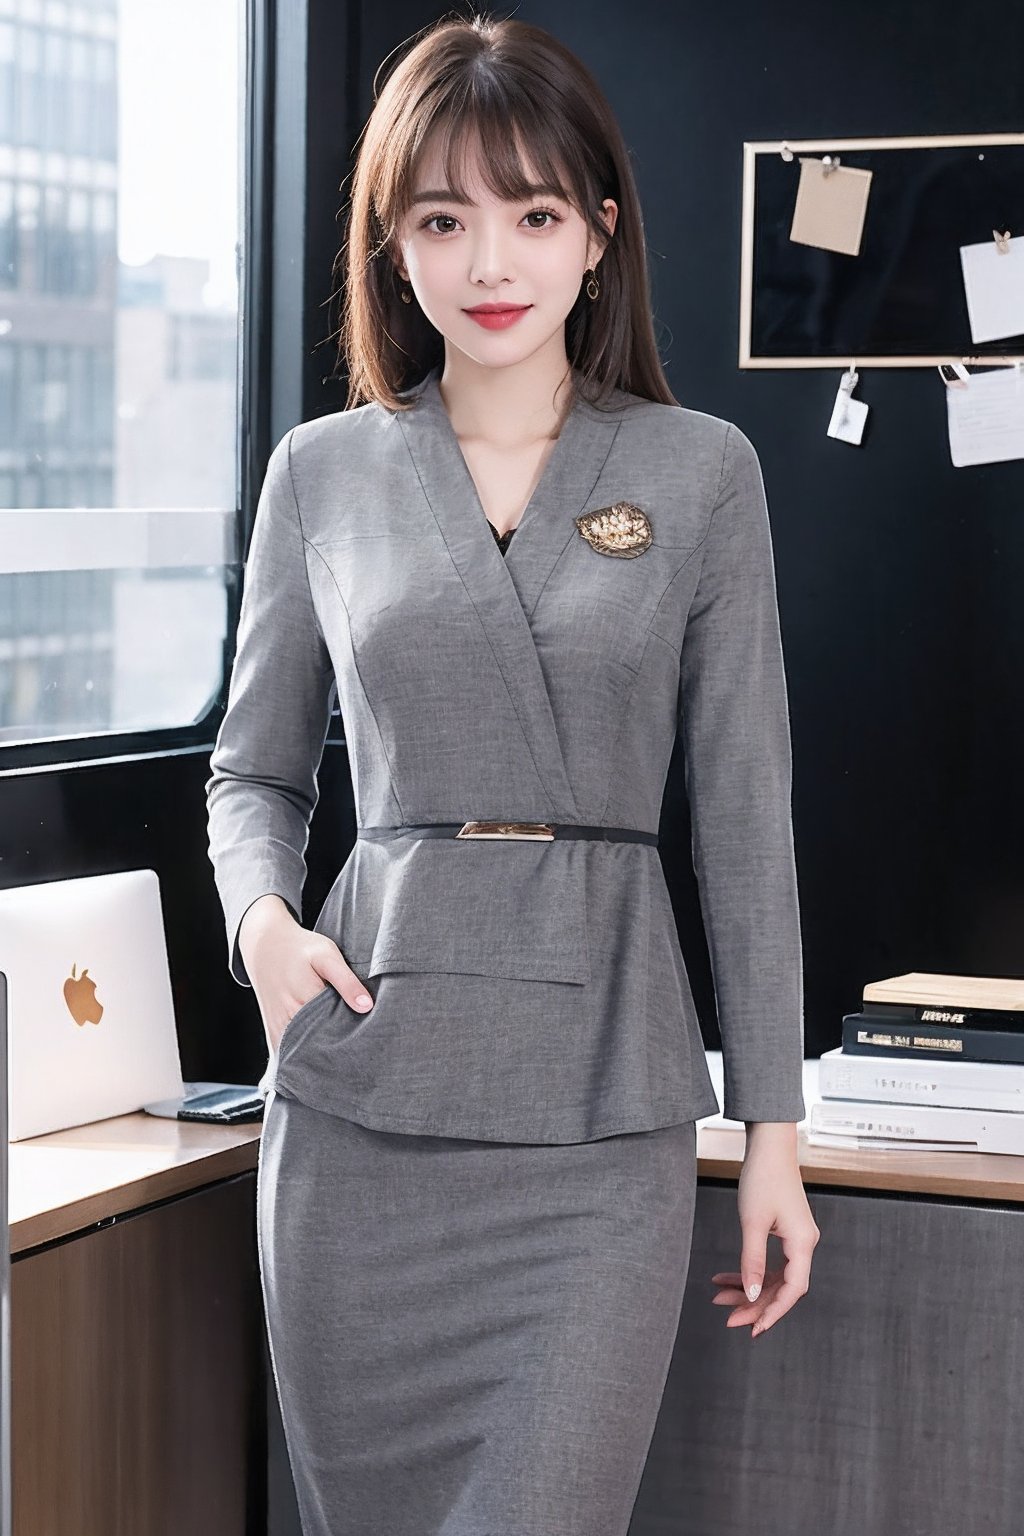 HDR,UHD,8K,best quality,masterpiece,Highly detailed,Studio lighting,ultra-fine painting,sharp focus,physically-based rendering,extreme detail description,Professional,masterpiece, best quality,delicate,beautiful,(1girl:2),(gray office_lady_uniform:1.5),(looking_at_viewer:1.2), realistic,(blunt bangs:1.2),(standing:1),office background,(Half-length photo:1),(smile:1),